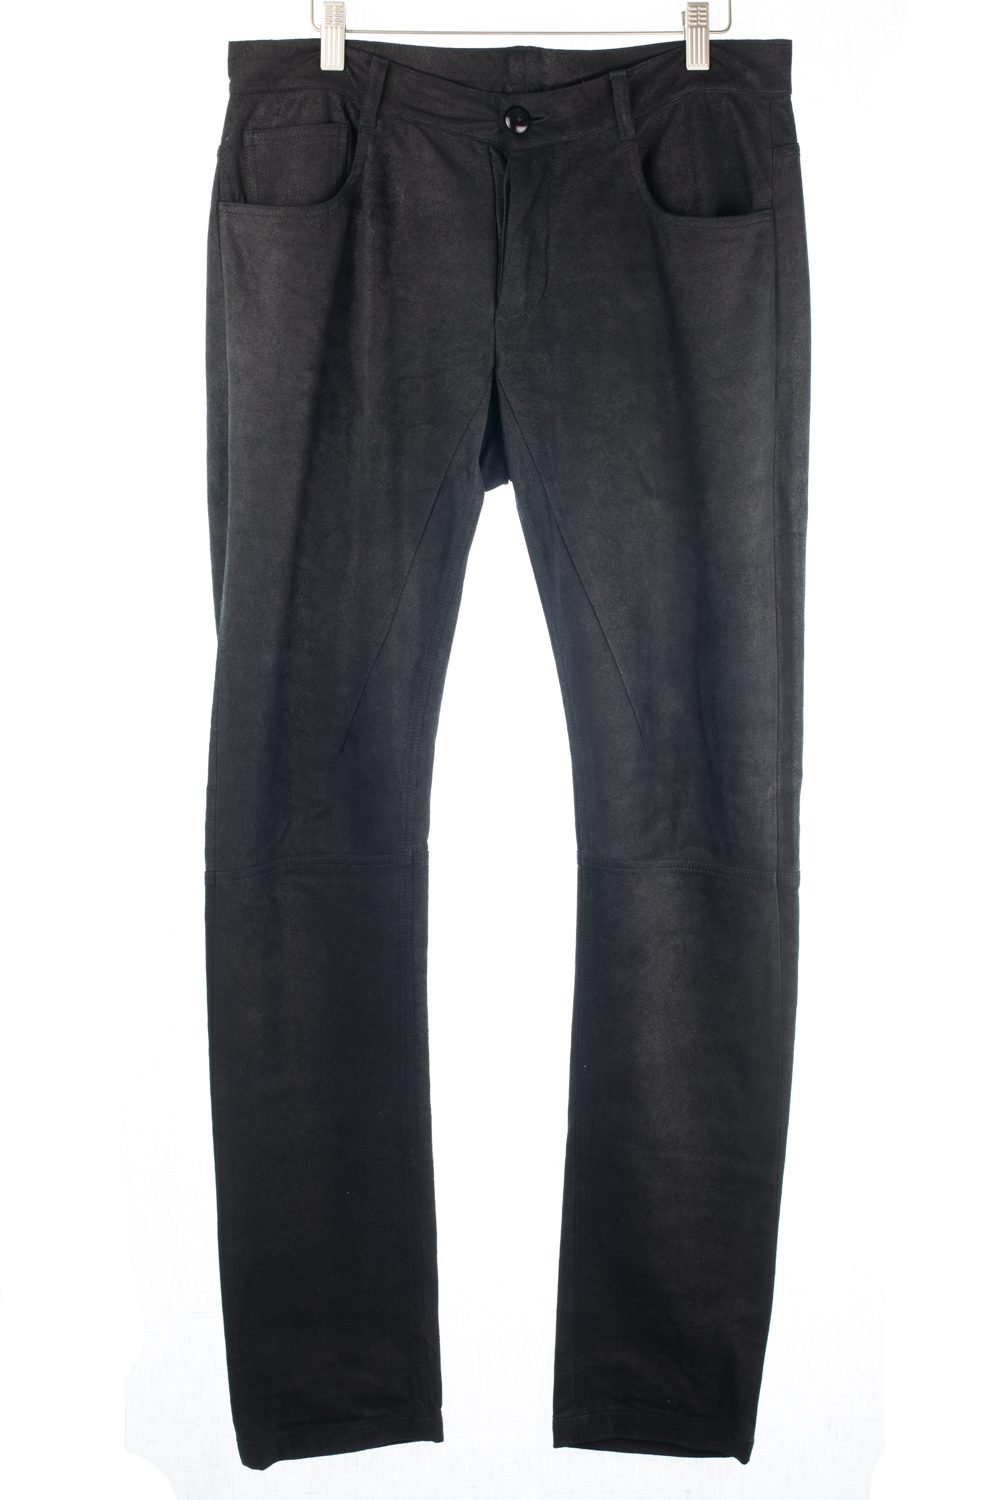 Fw14 Moody Leather/Cotton Blend Pants